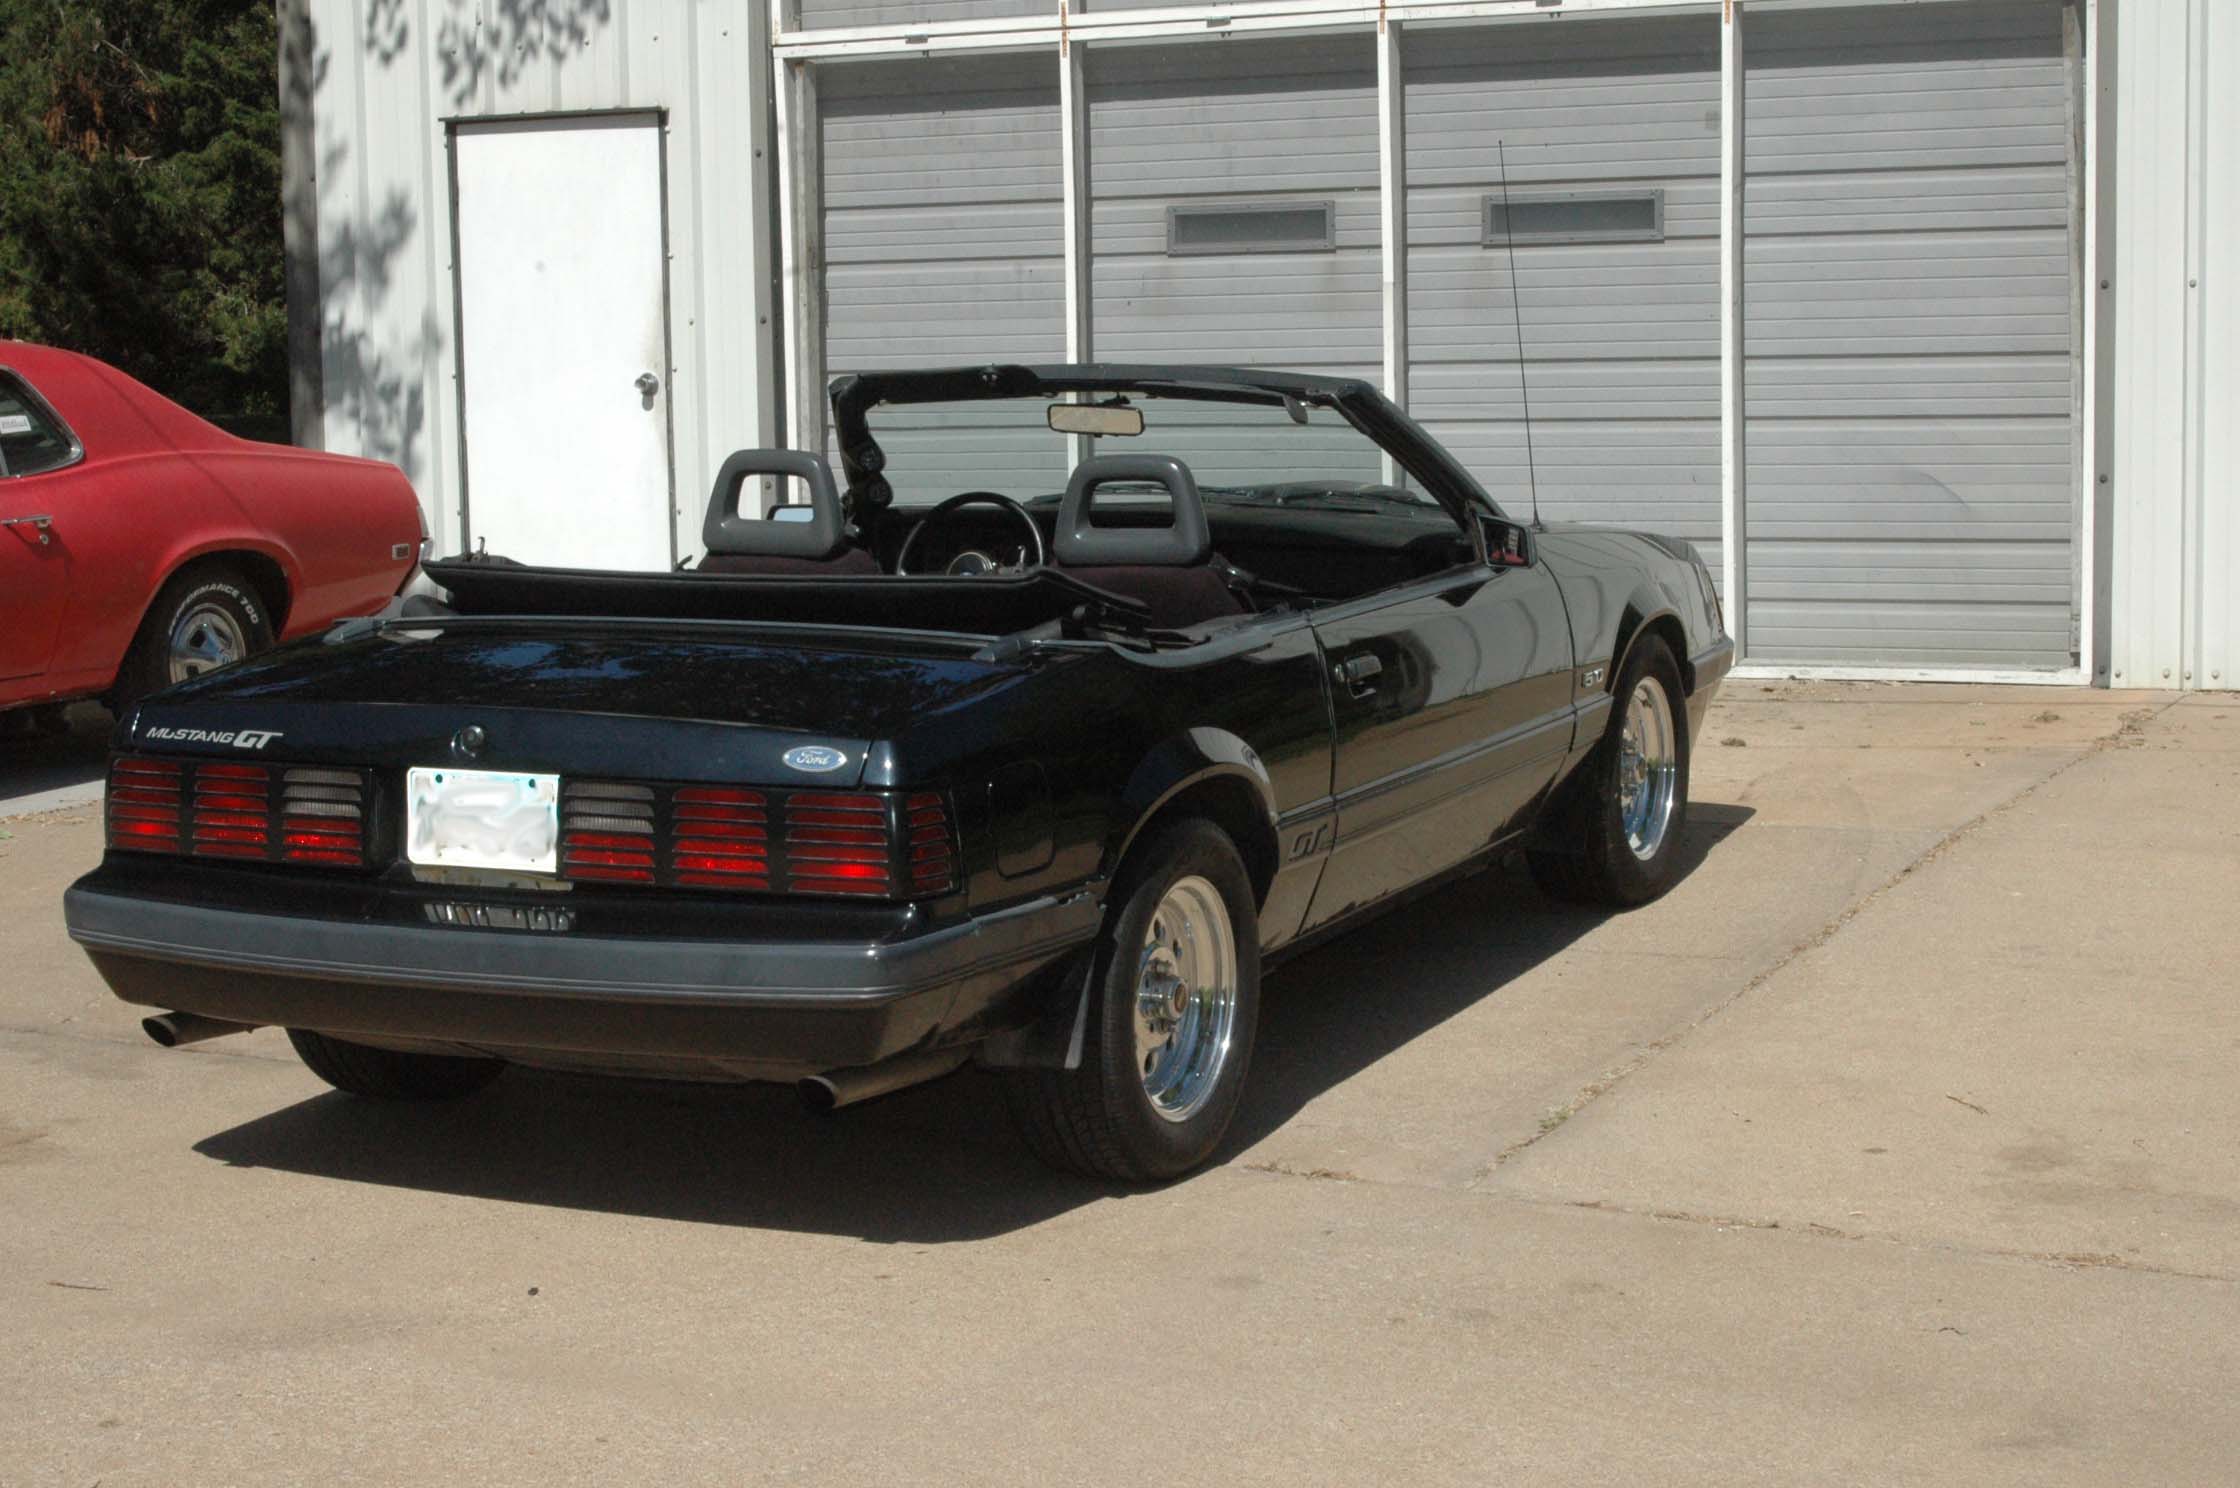 ford mustang gt convertible here is a photo album of my wife s 85 gt ...